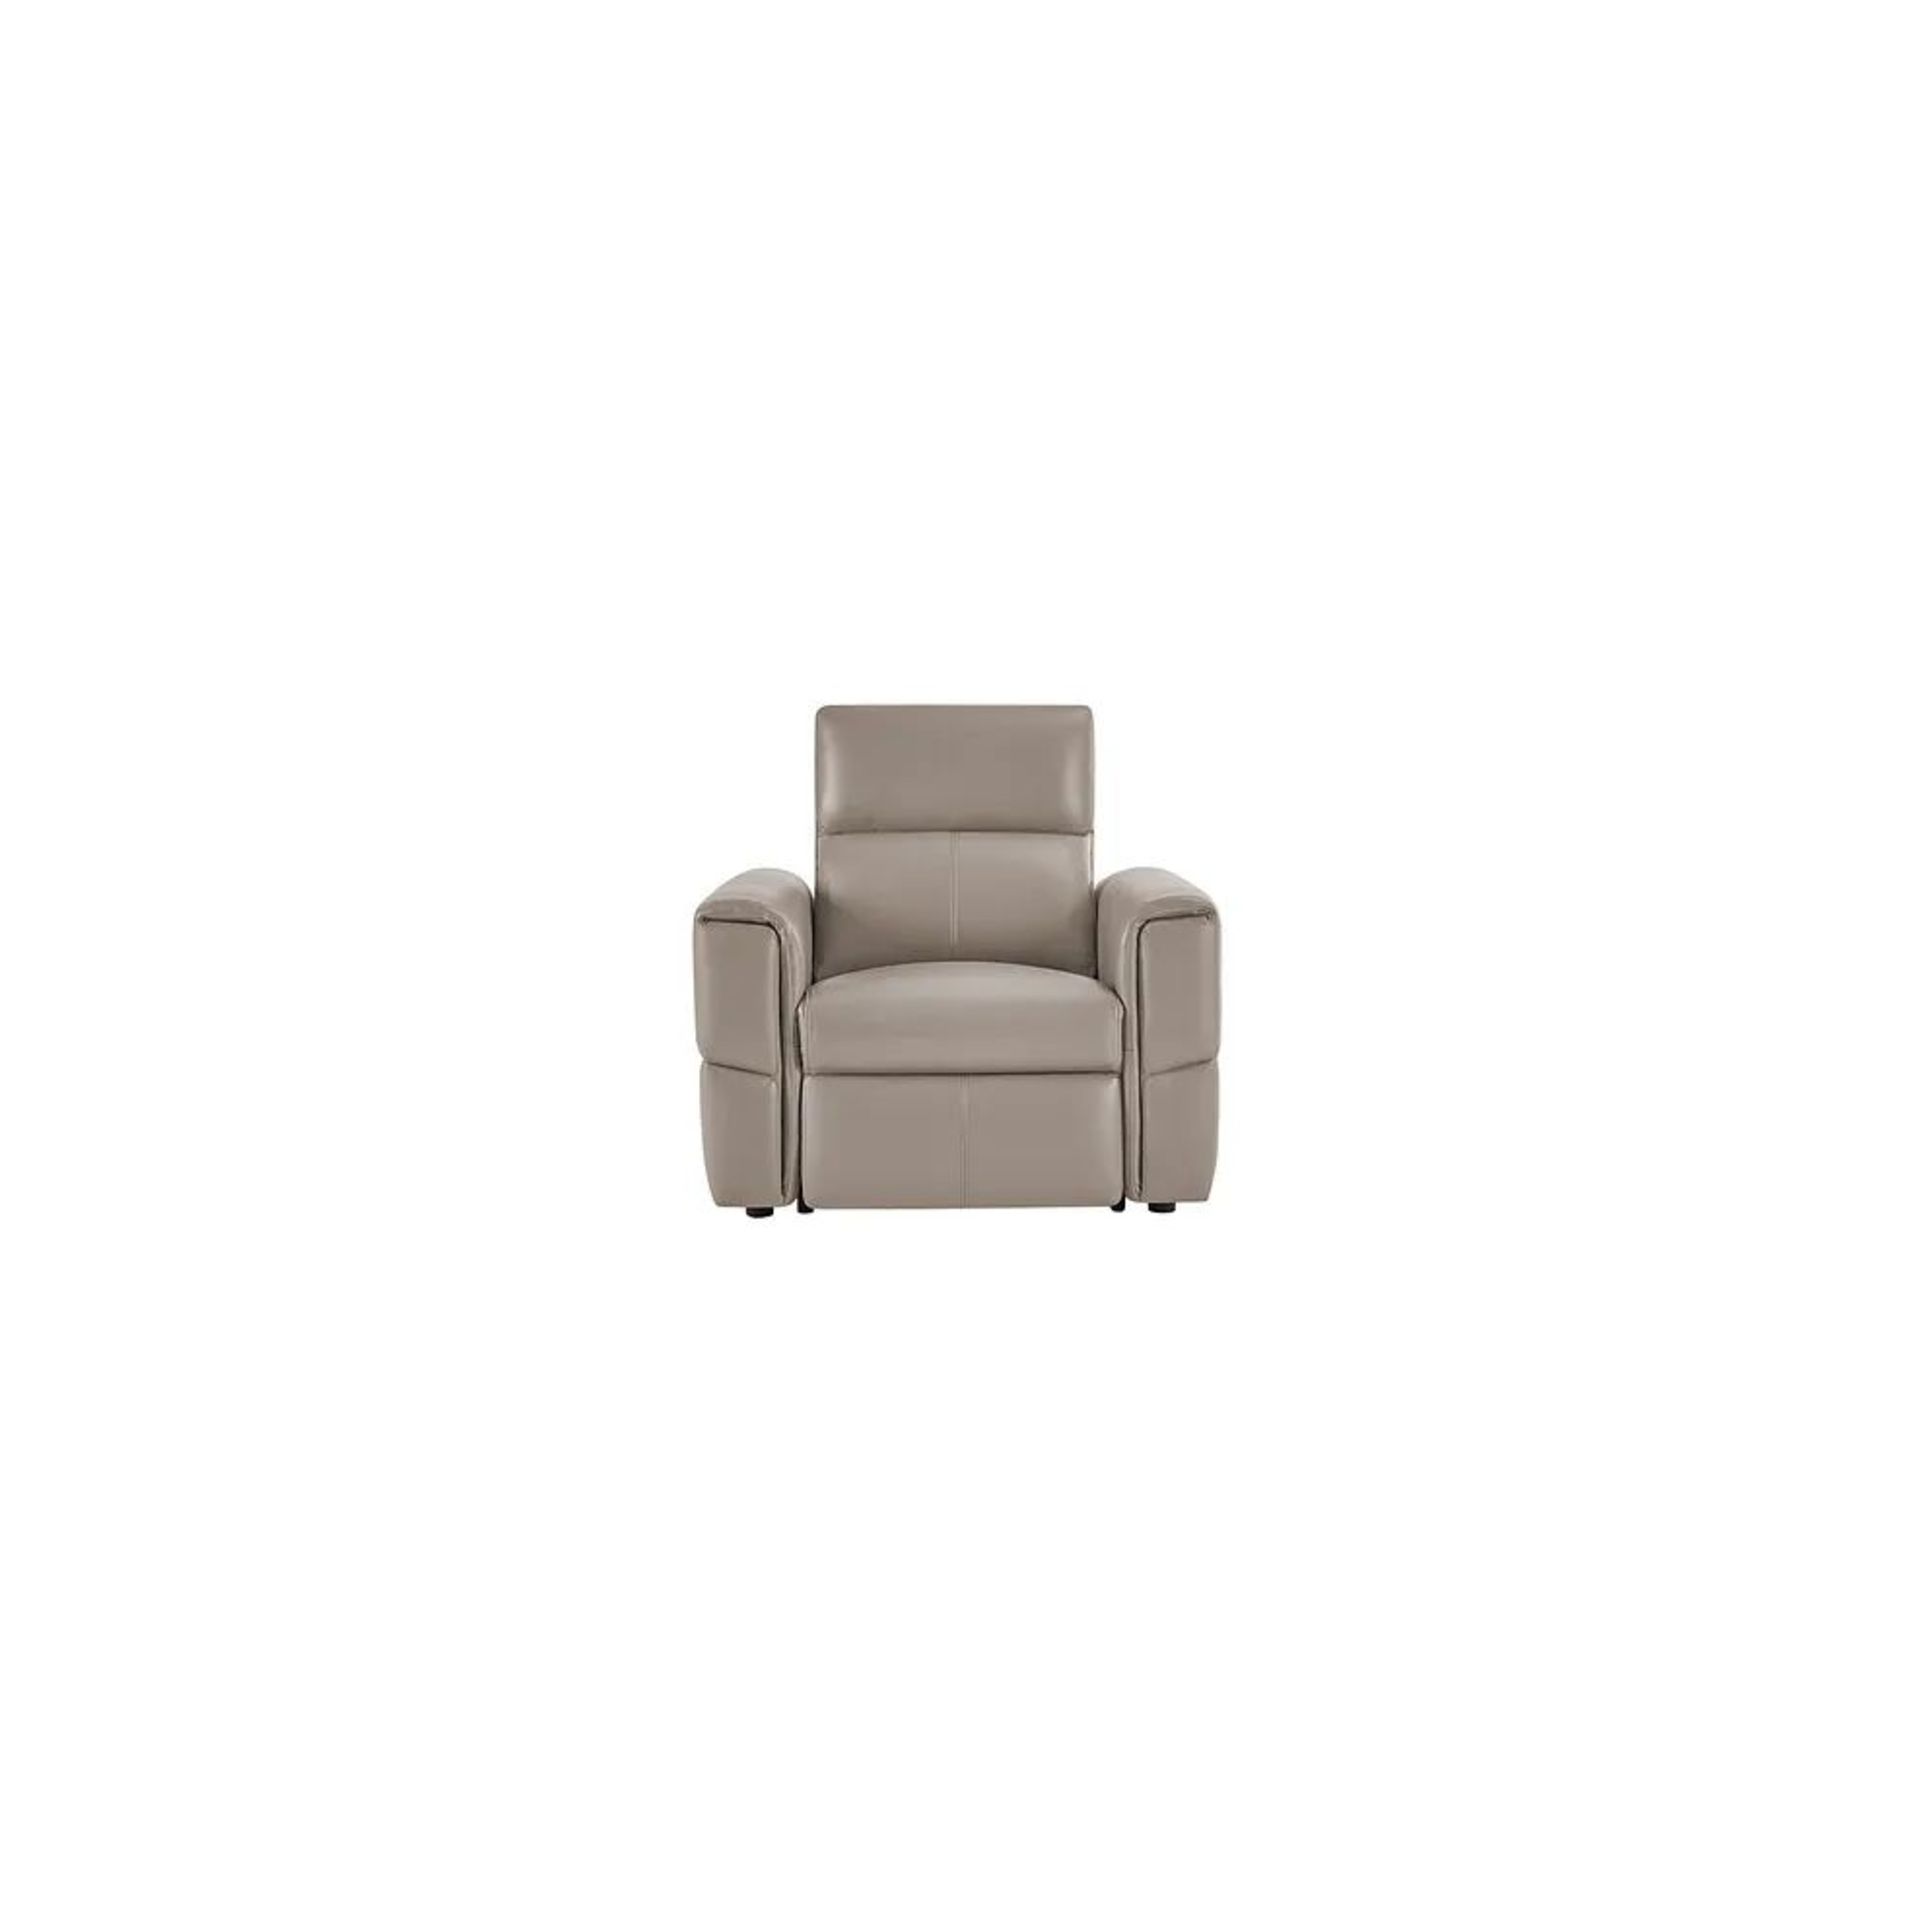 BRAND NEW SAMSON Electric Recliner Armchair - STONE LEATHER. RRP £1249. Showcasing neat, modern - Image 2 of 10